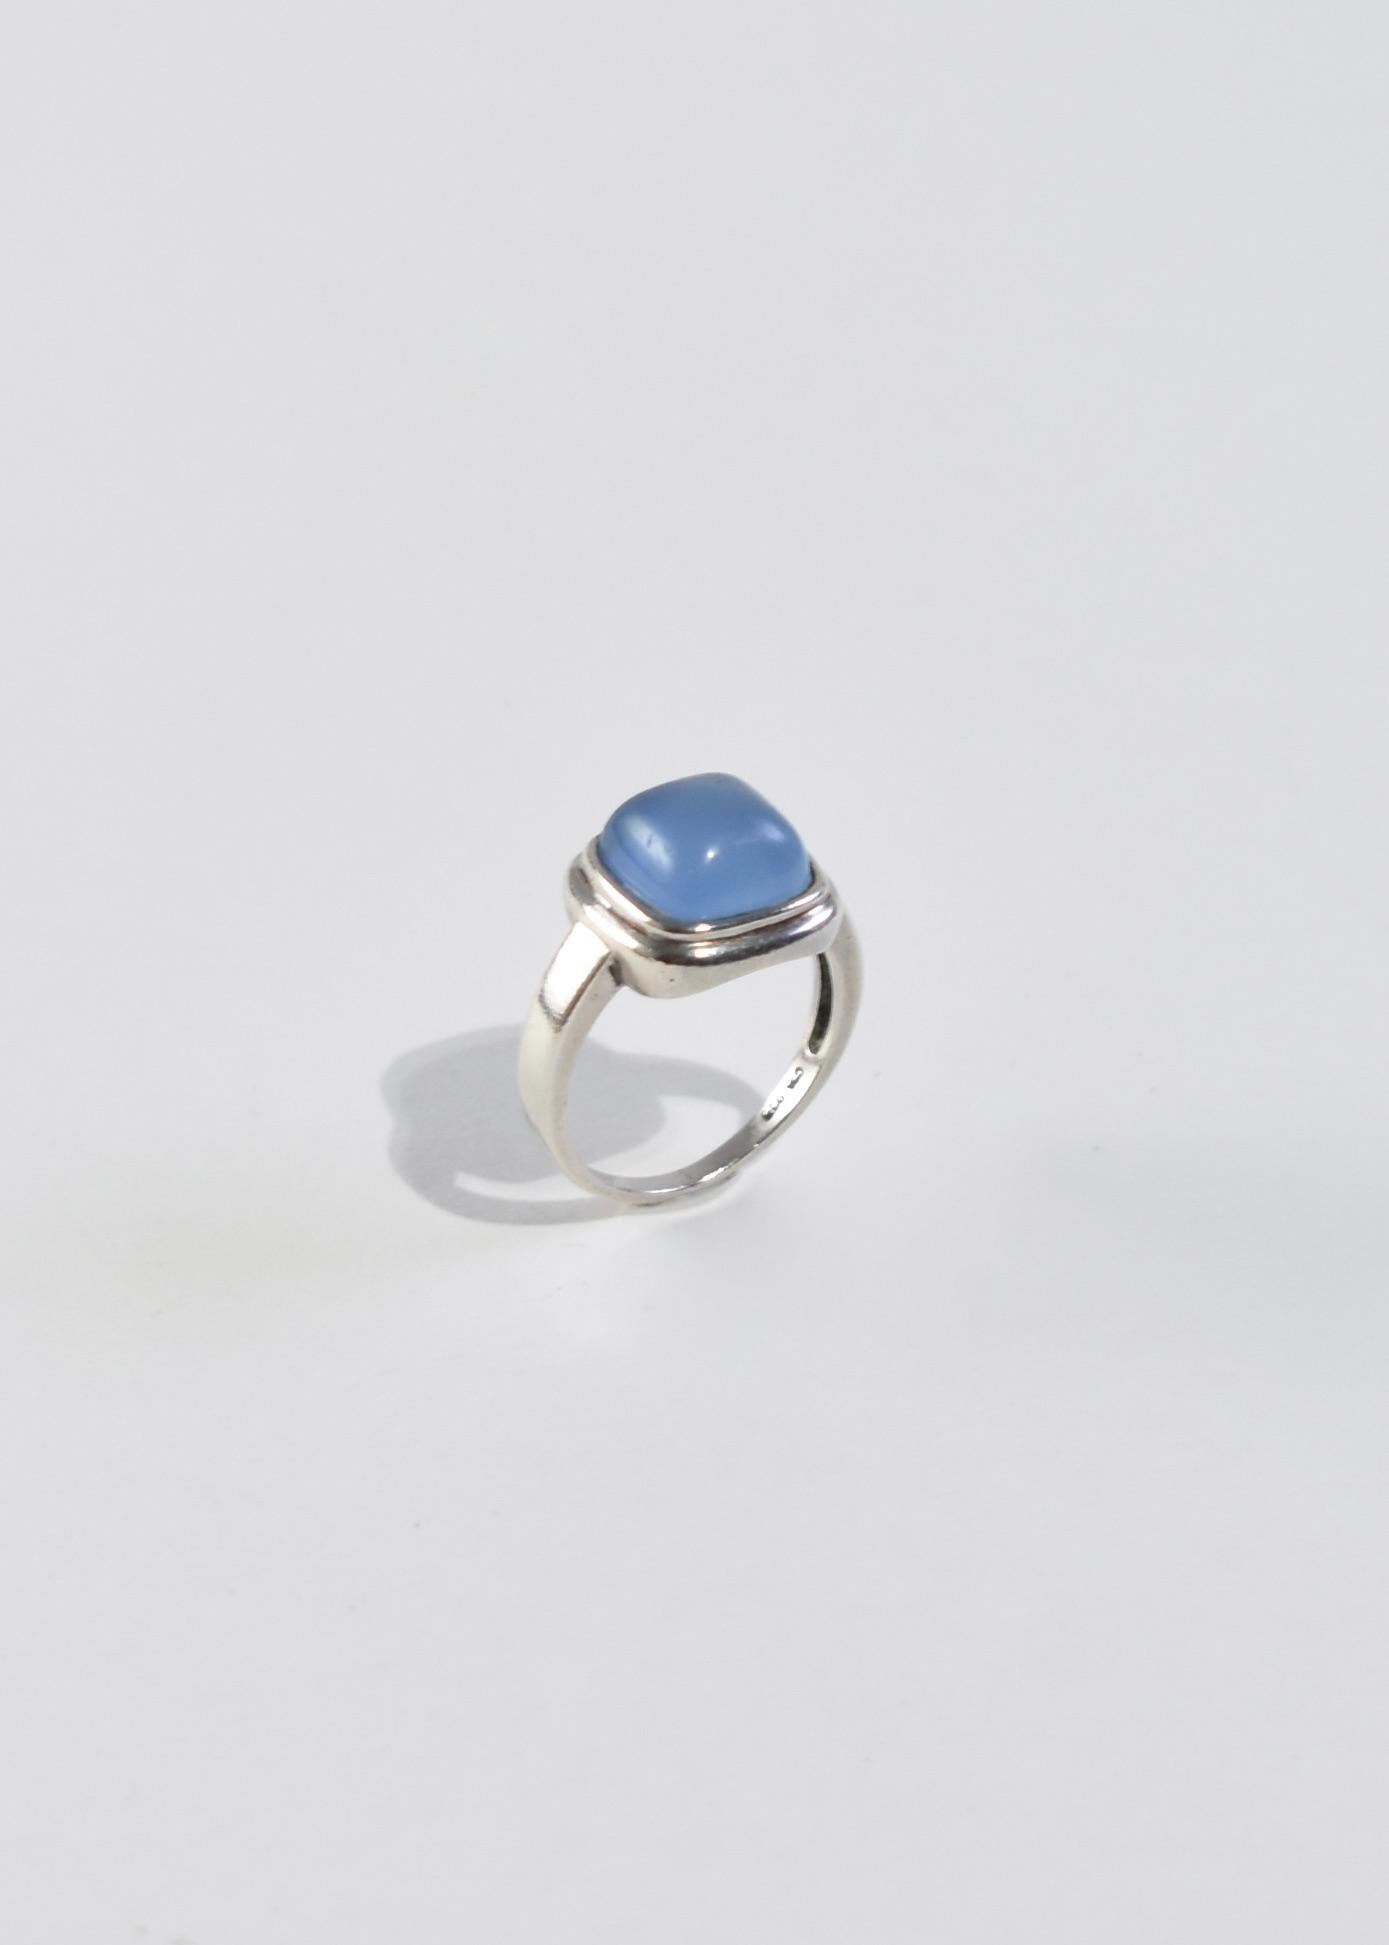 Cabochon Chalcedony Statement Ring